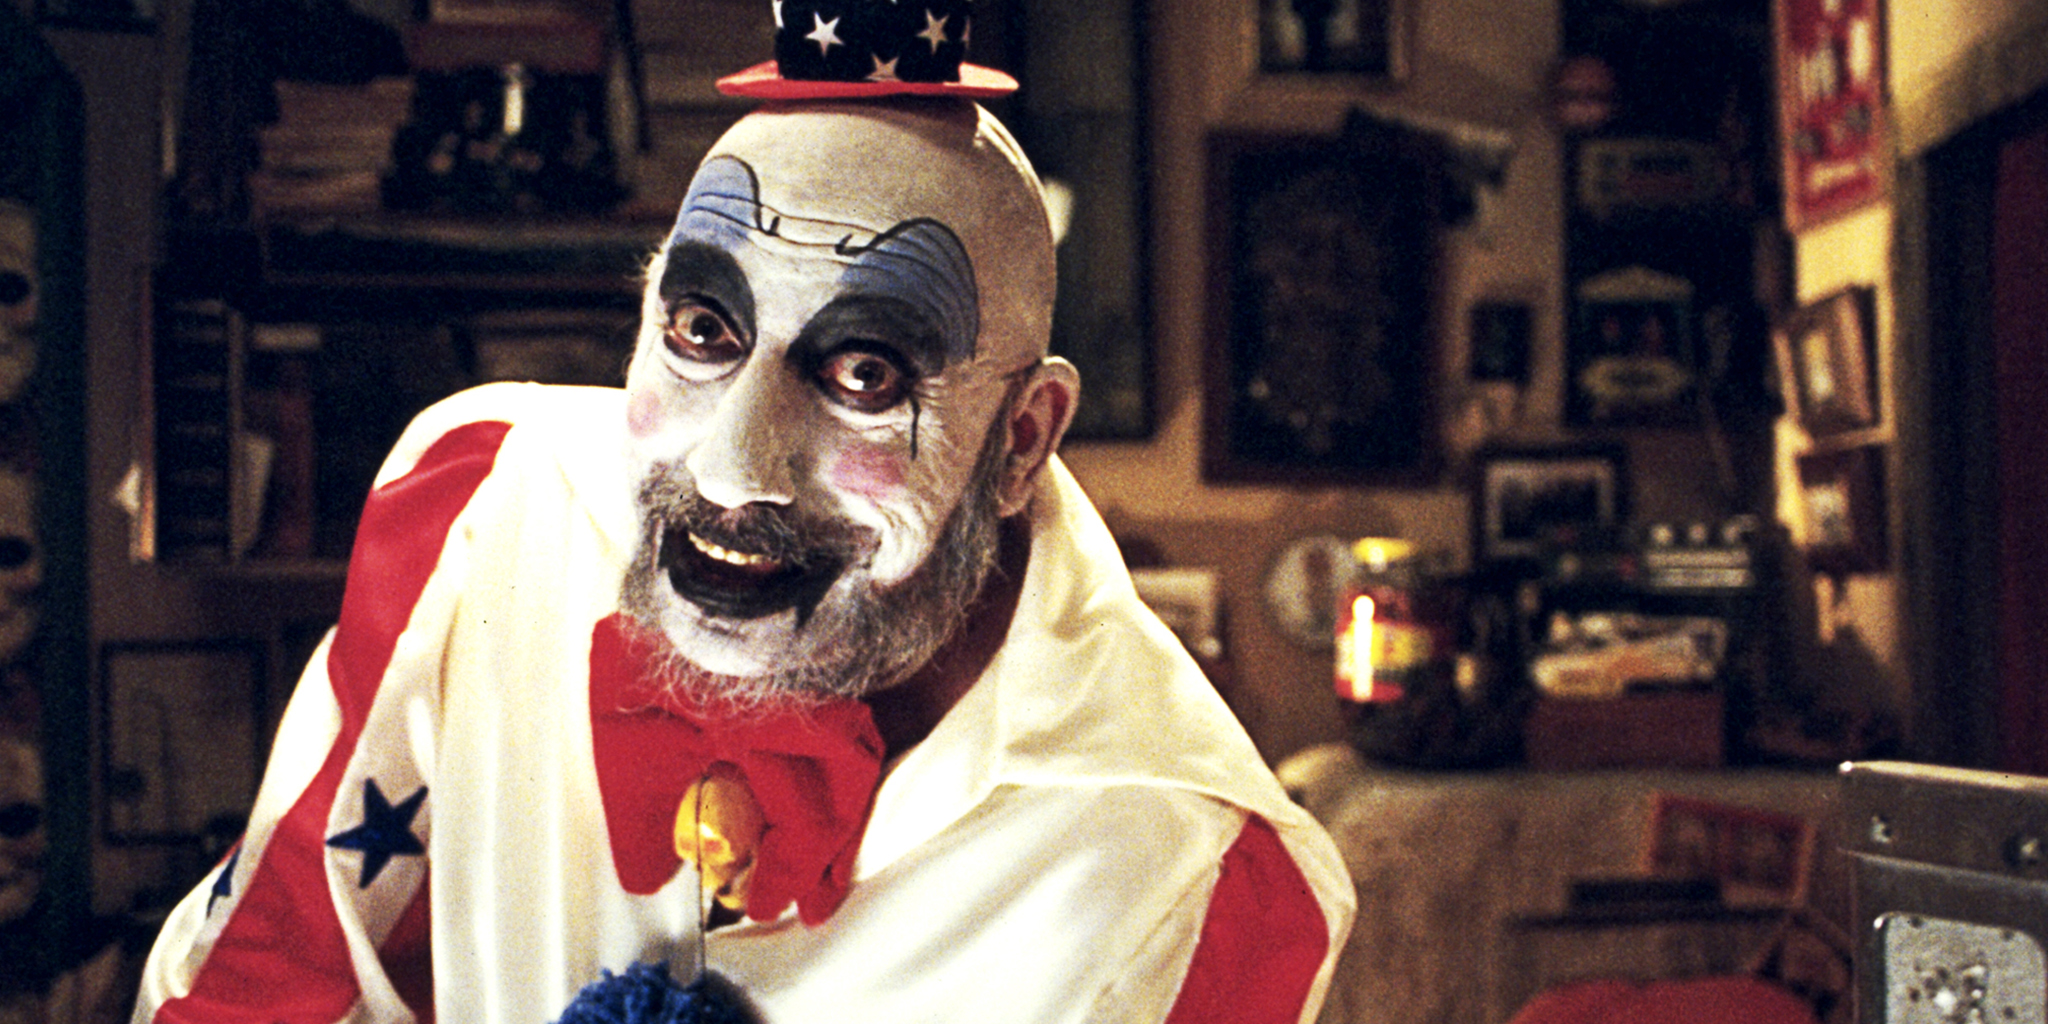 On the Road to 'Hell': Looking Back on 'House of 1000 Corpses' and 'The Devil's Rejects'